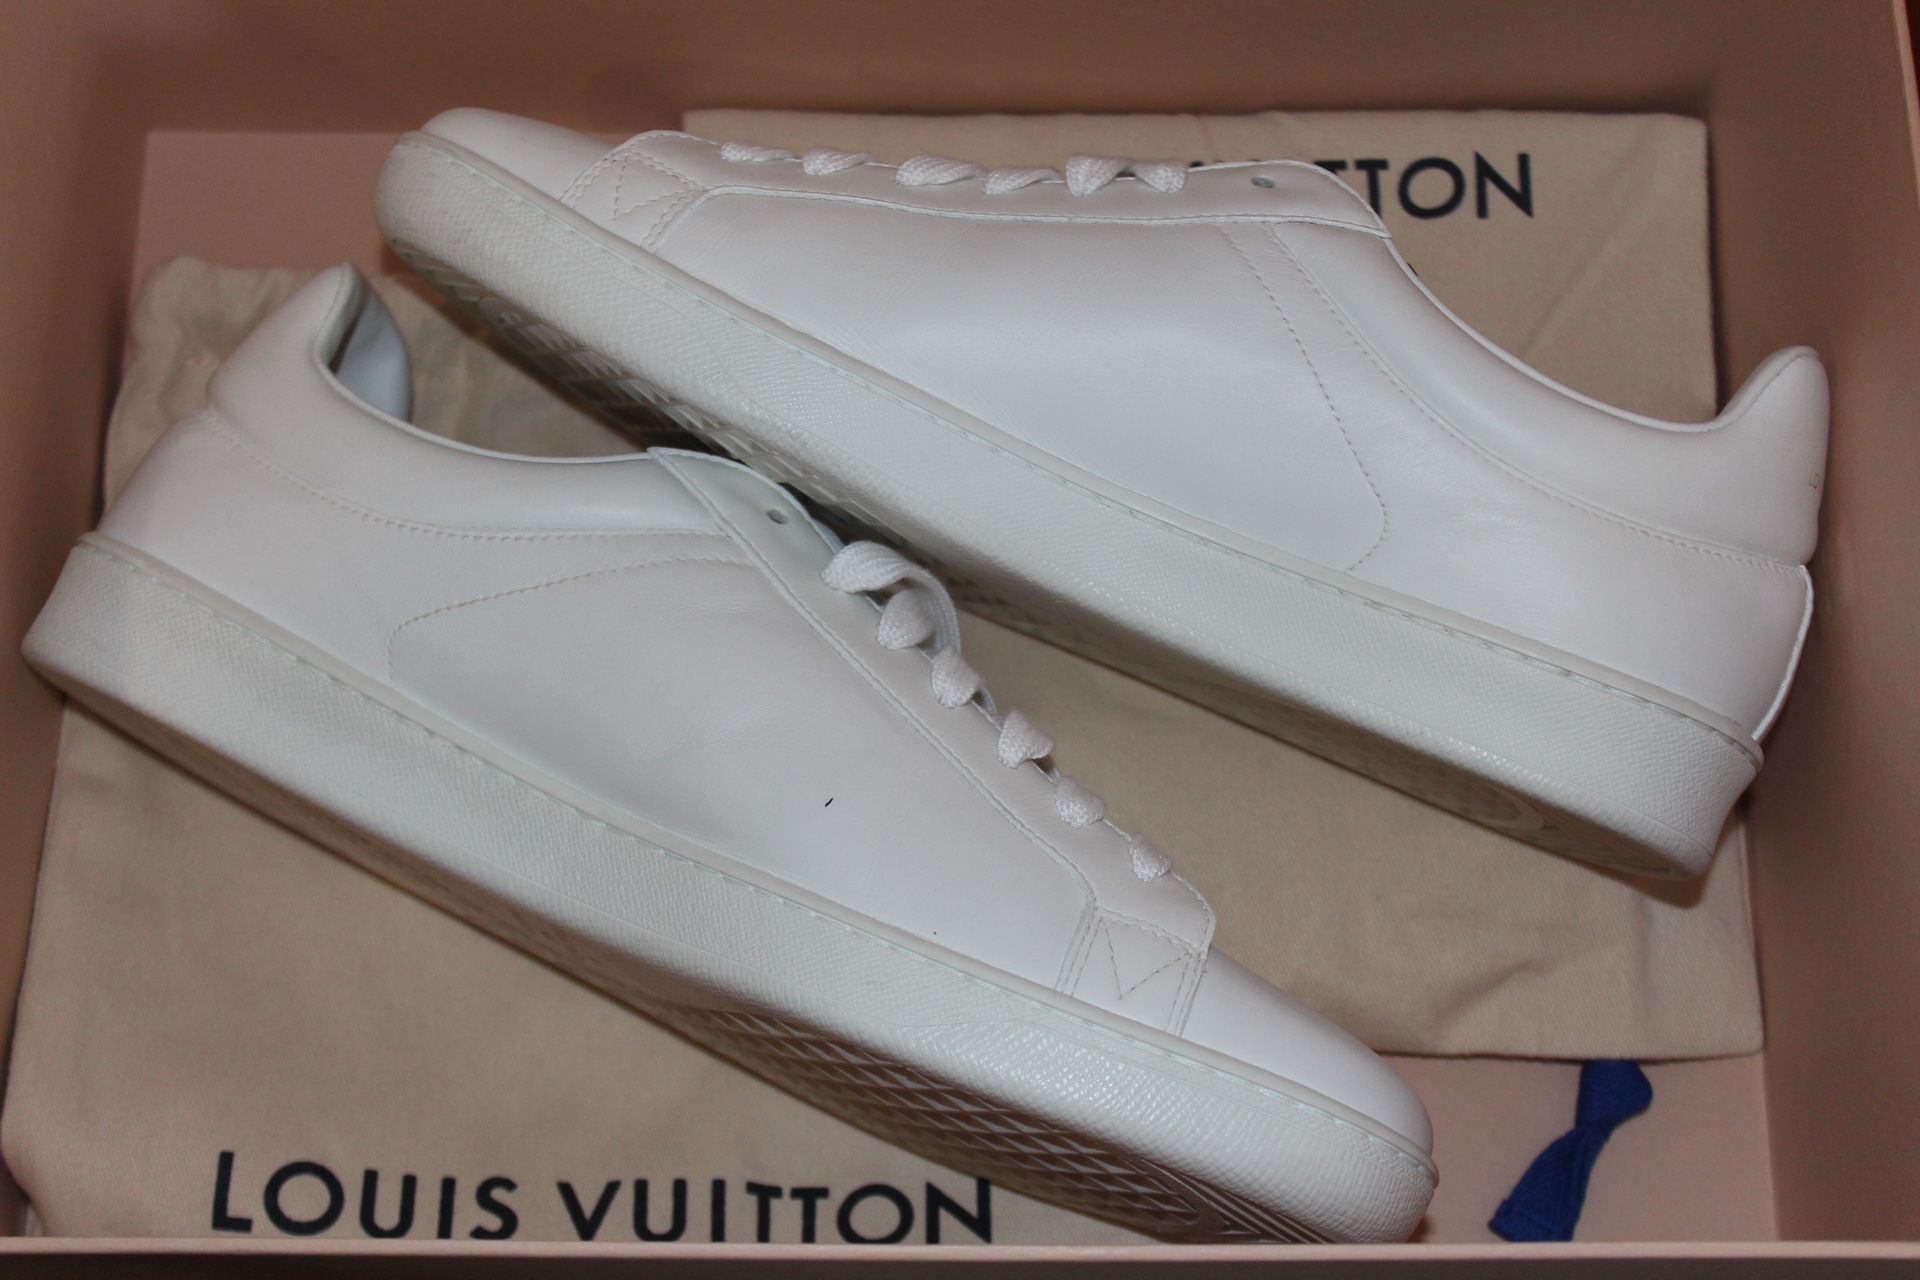 Louis Vuitton Luxembourg sneaker for Sale in Anaheim, CA - OfferUp